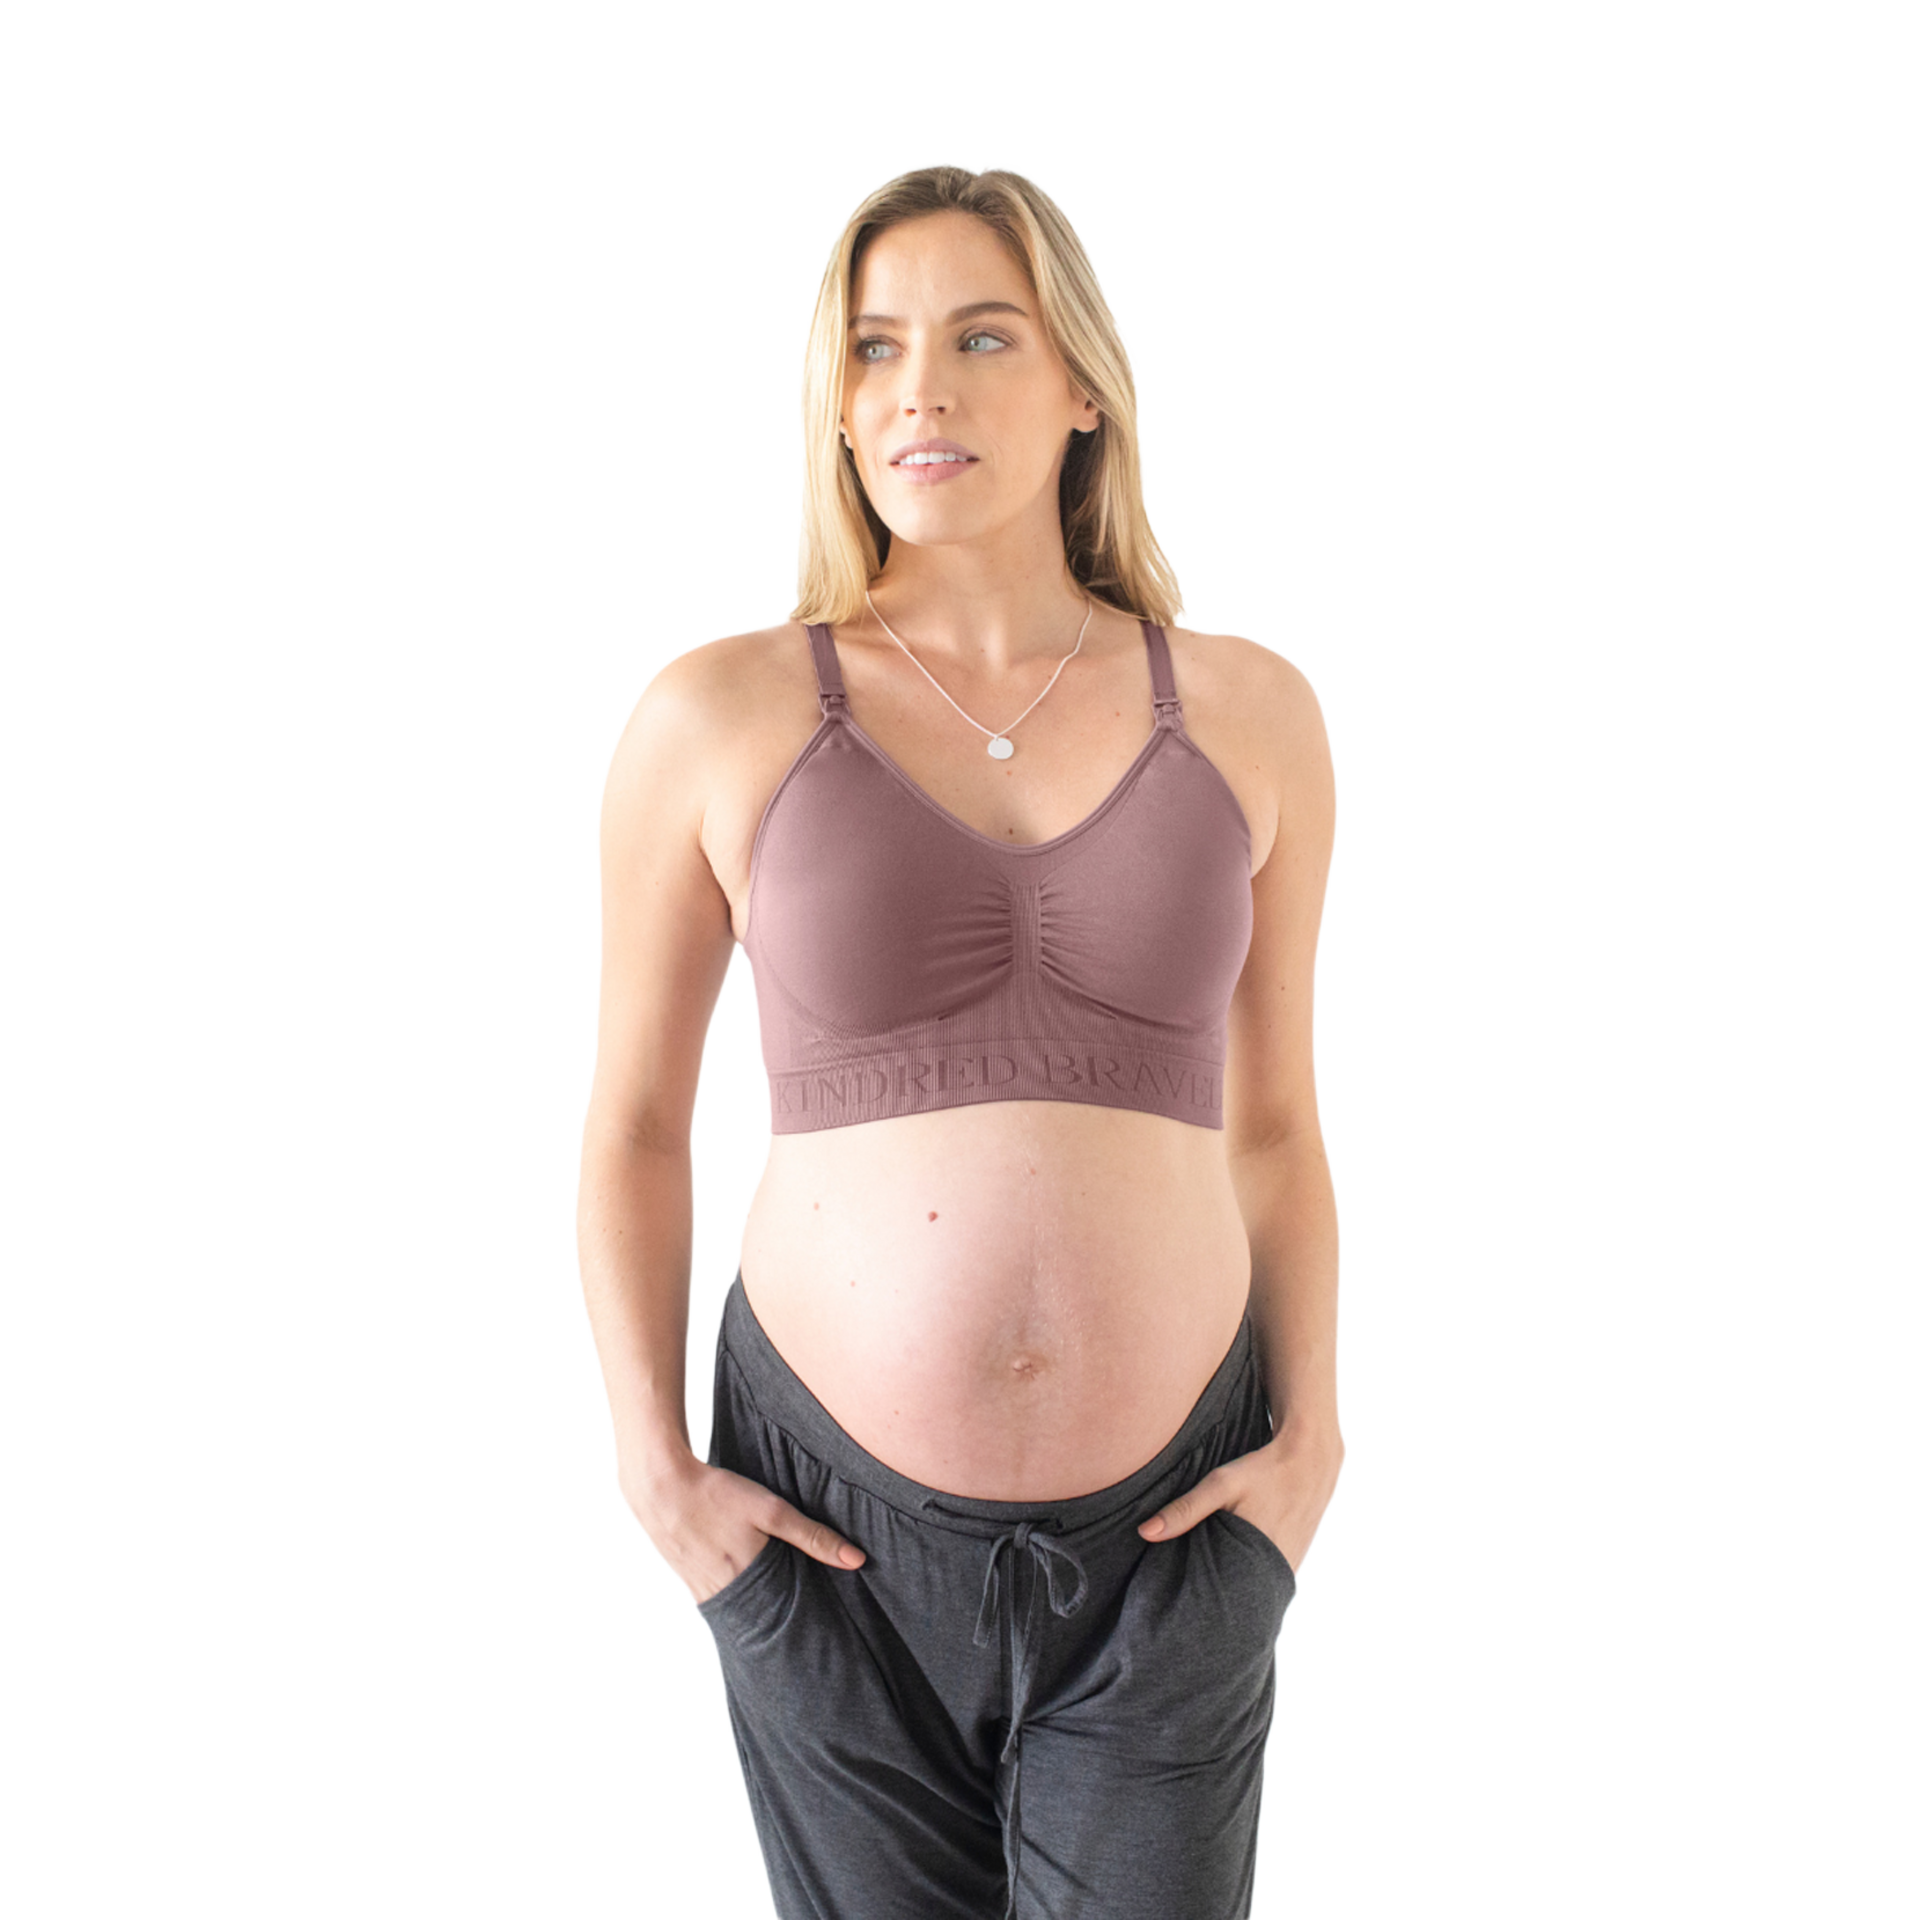 G H Kindred Bravely Ultra Comfort Smooth Busty Nursing Bra for F I Cup Wireless Maternity Bra 